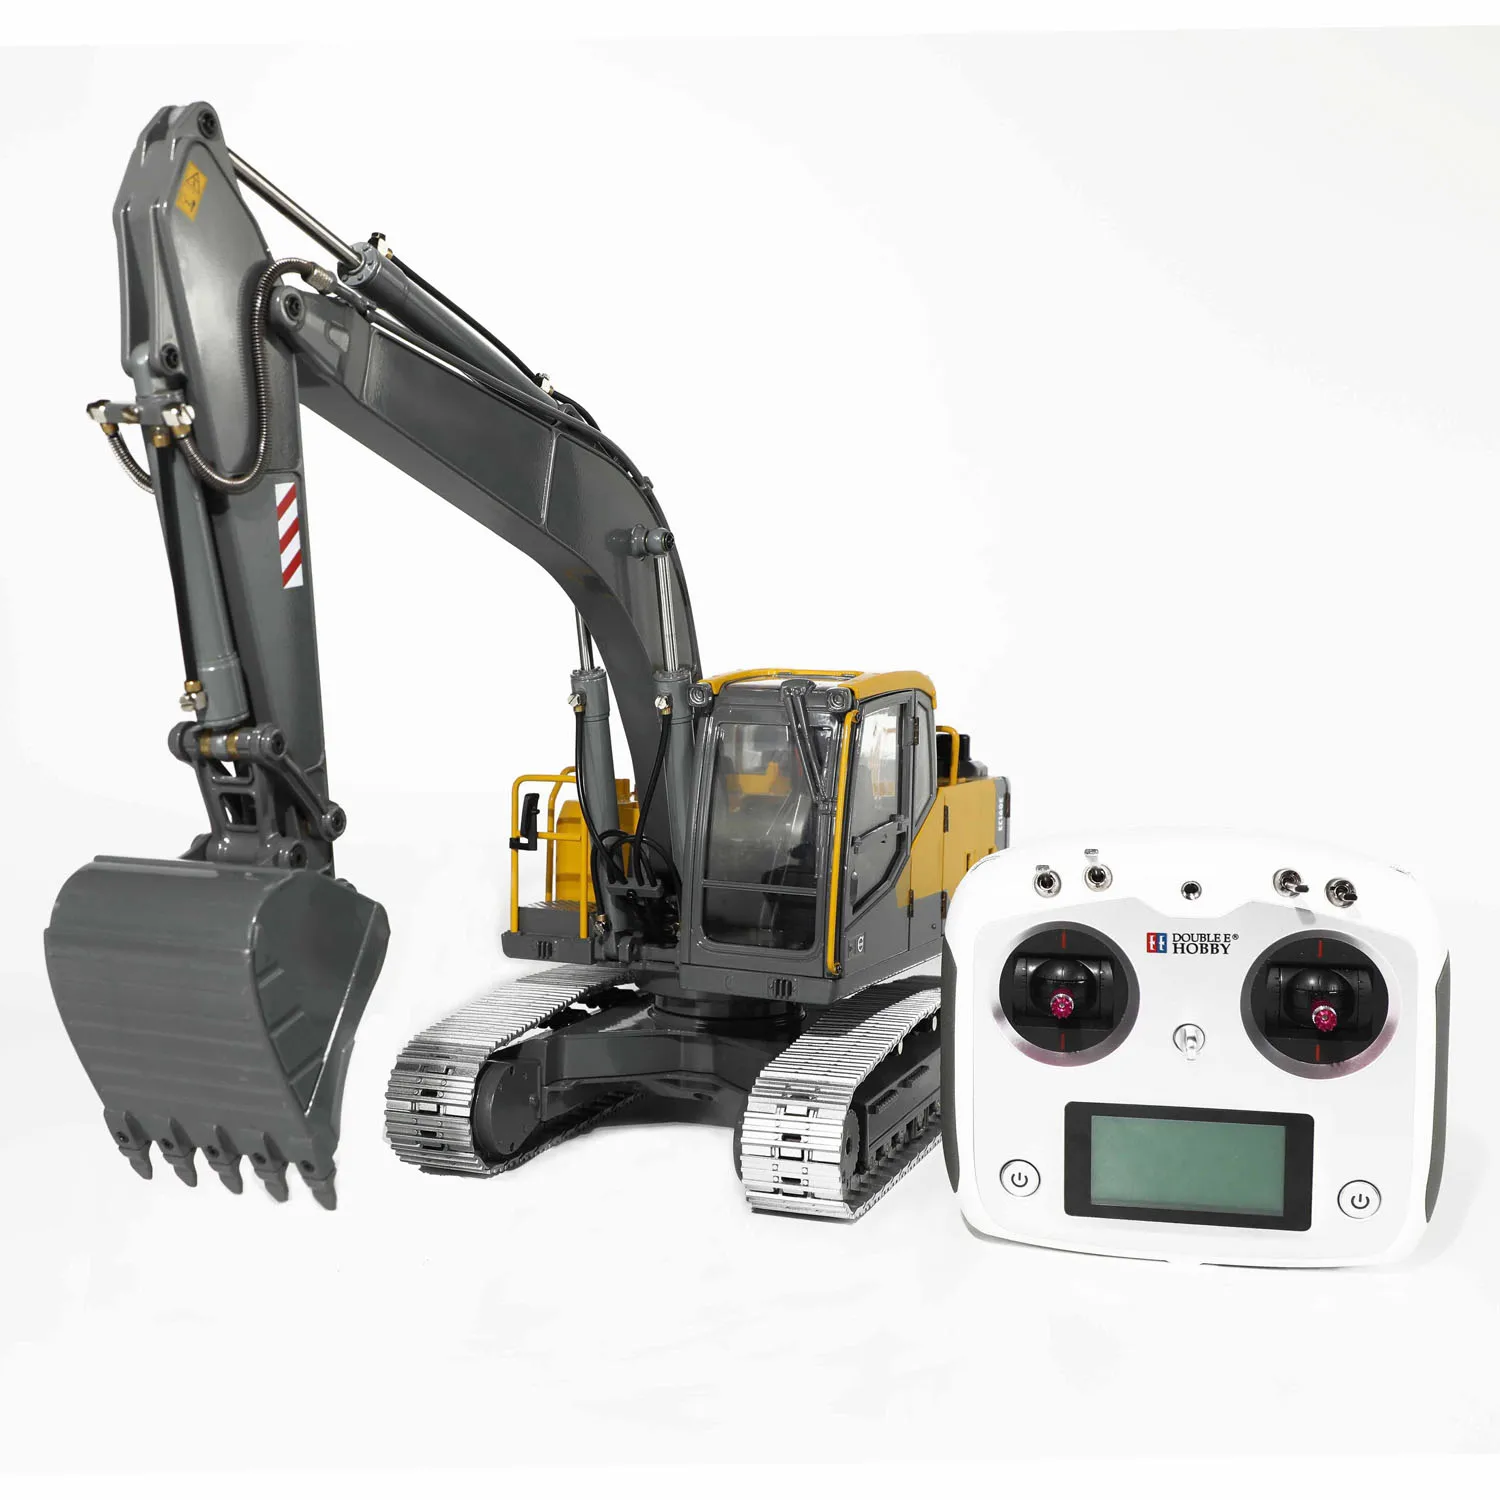 

EC160E RC Hydraulic 1/14 Excavator Double E Alloy Remote Control Diggers Model Light System Battery Christmas Gifts TH23138